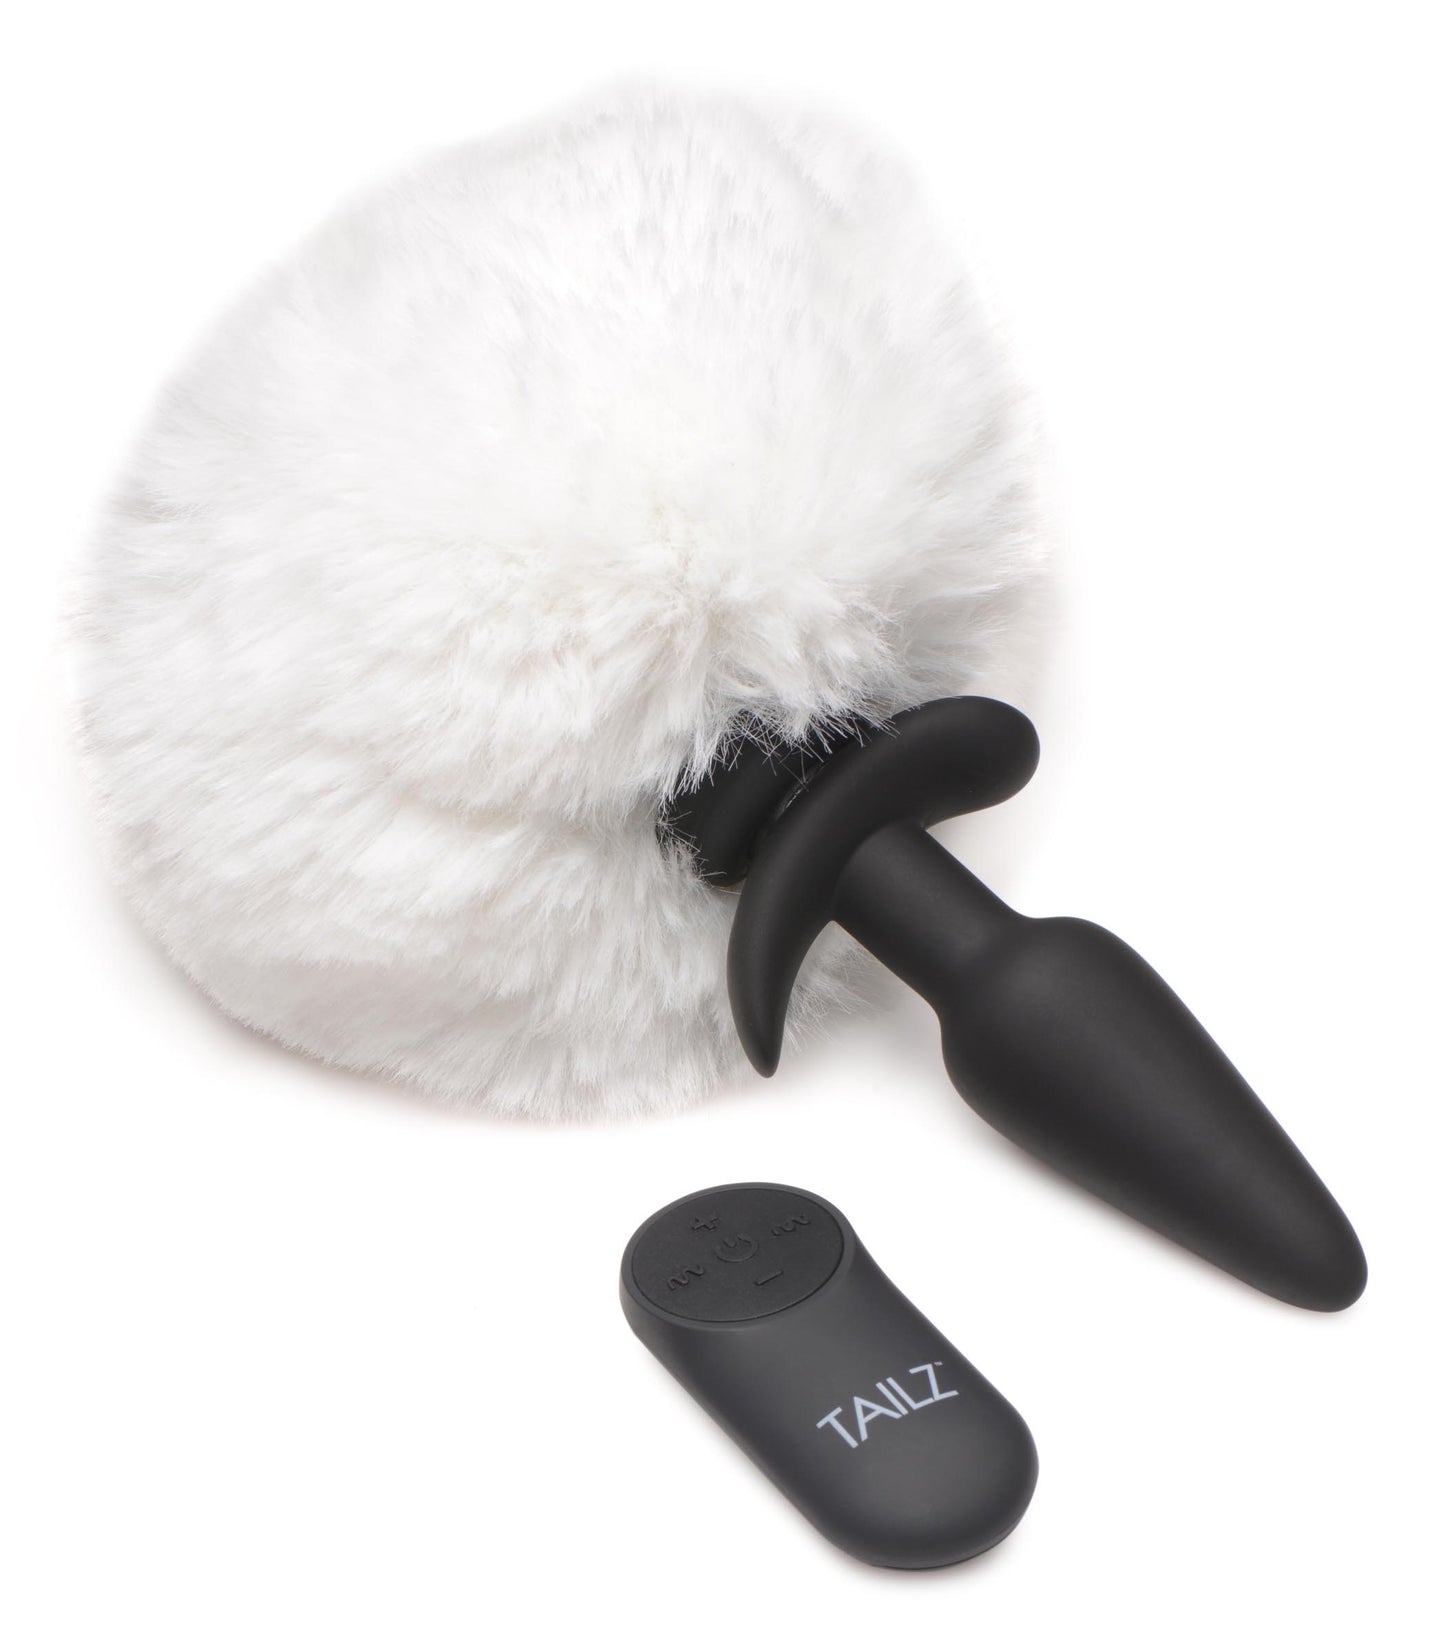 Small Vibrating Anal Plug with Interchangeable Bunny Tail - White - UABDSM